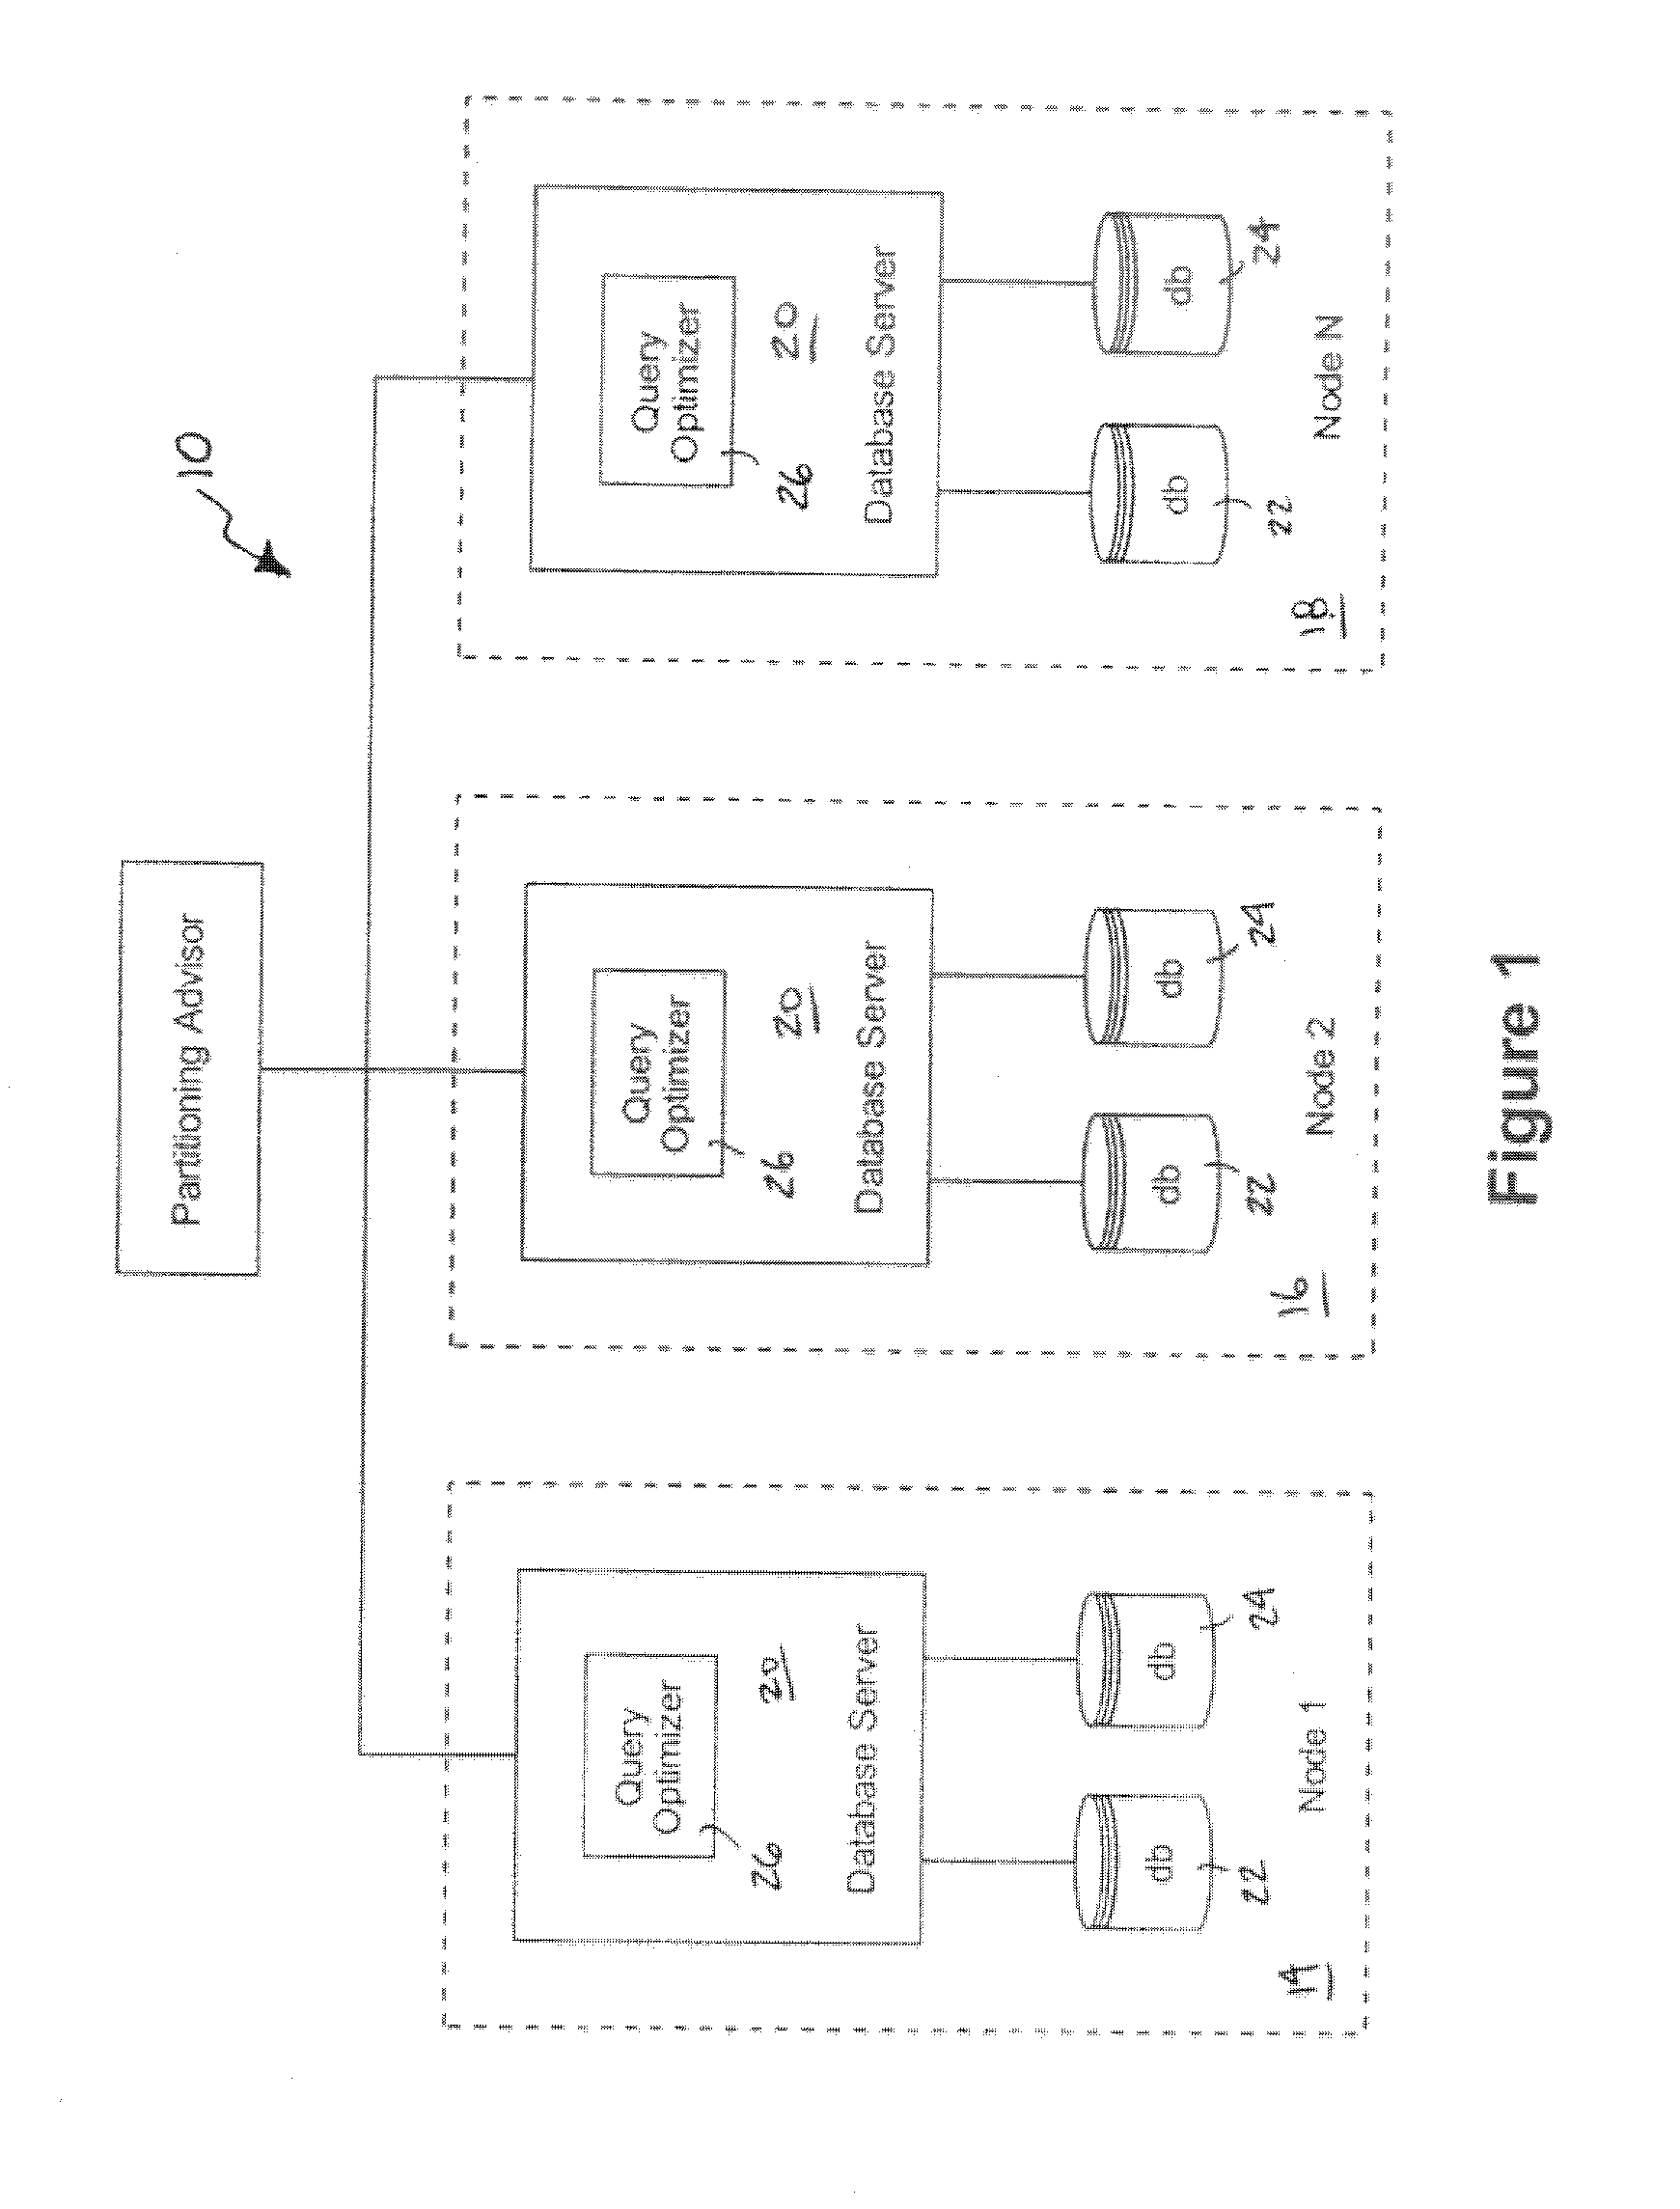 System and method for automating data partitioning in a parallel database